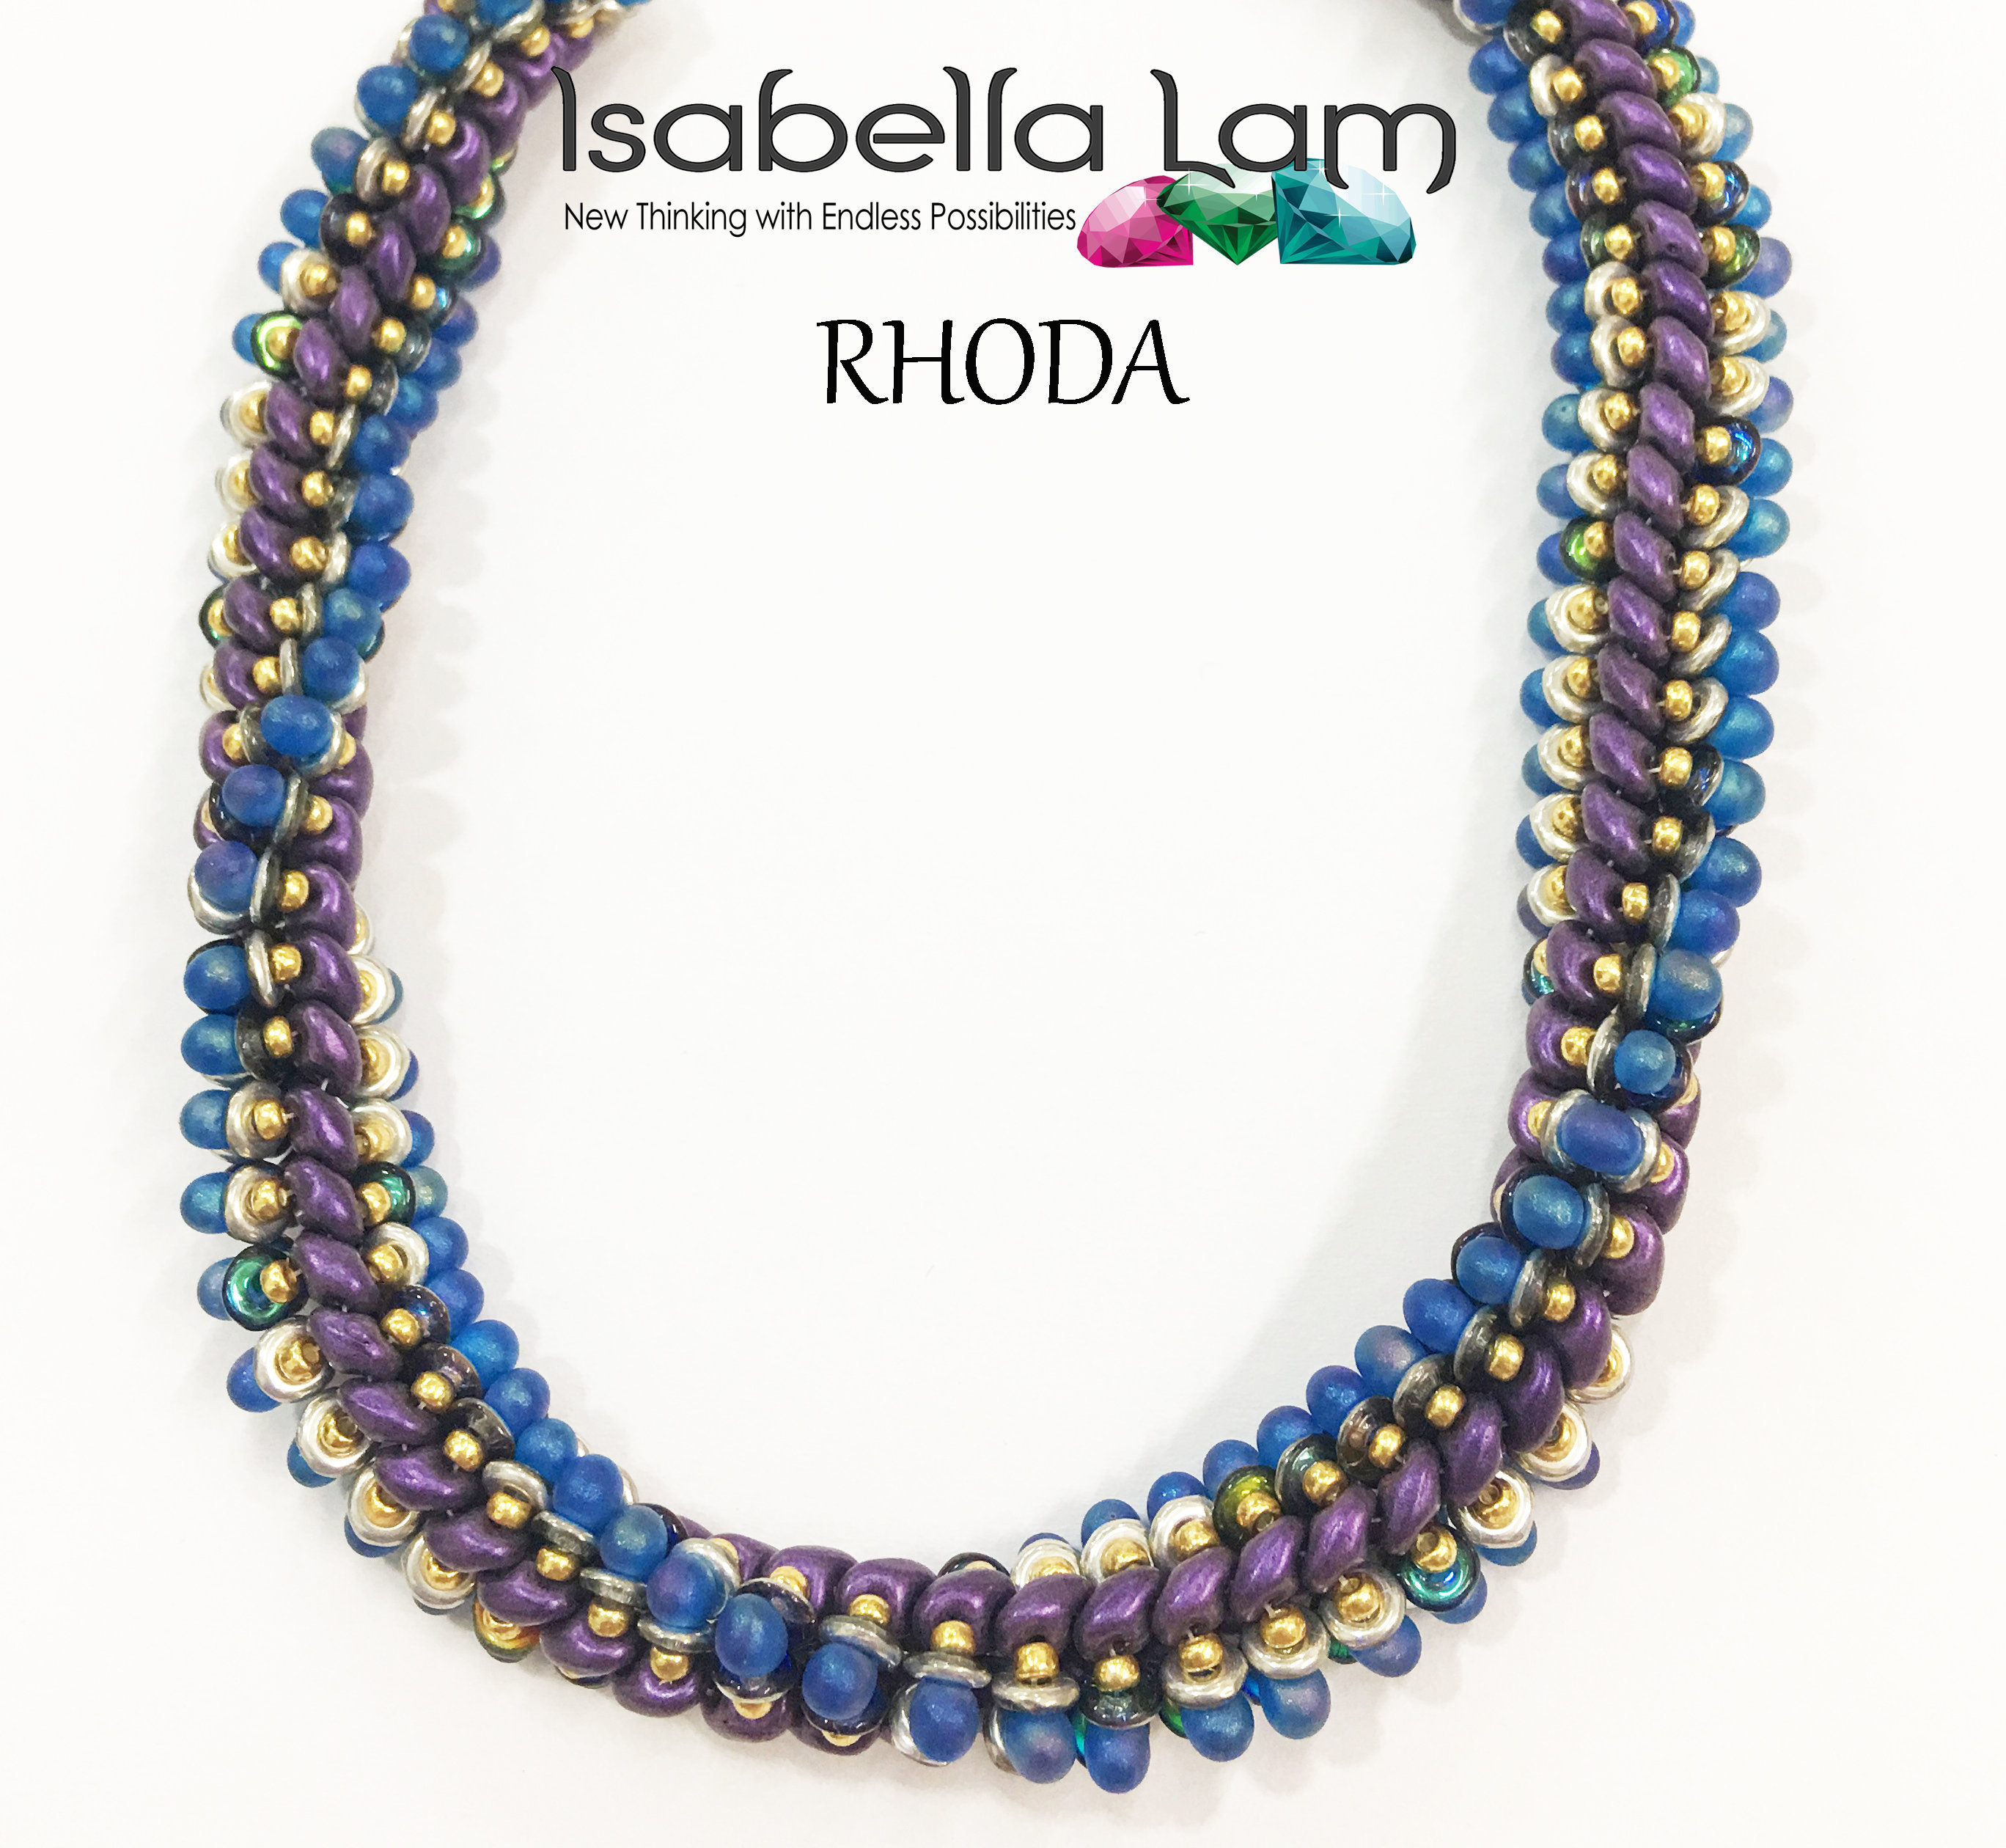 Double Spiral Beaded Rope Tutorial: How to Make a Beaded Chain